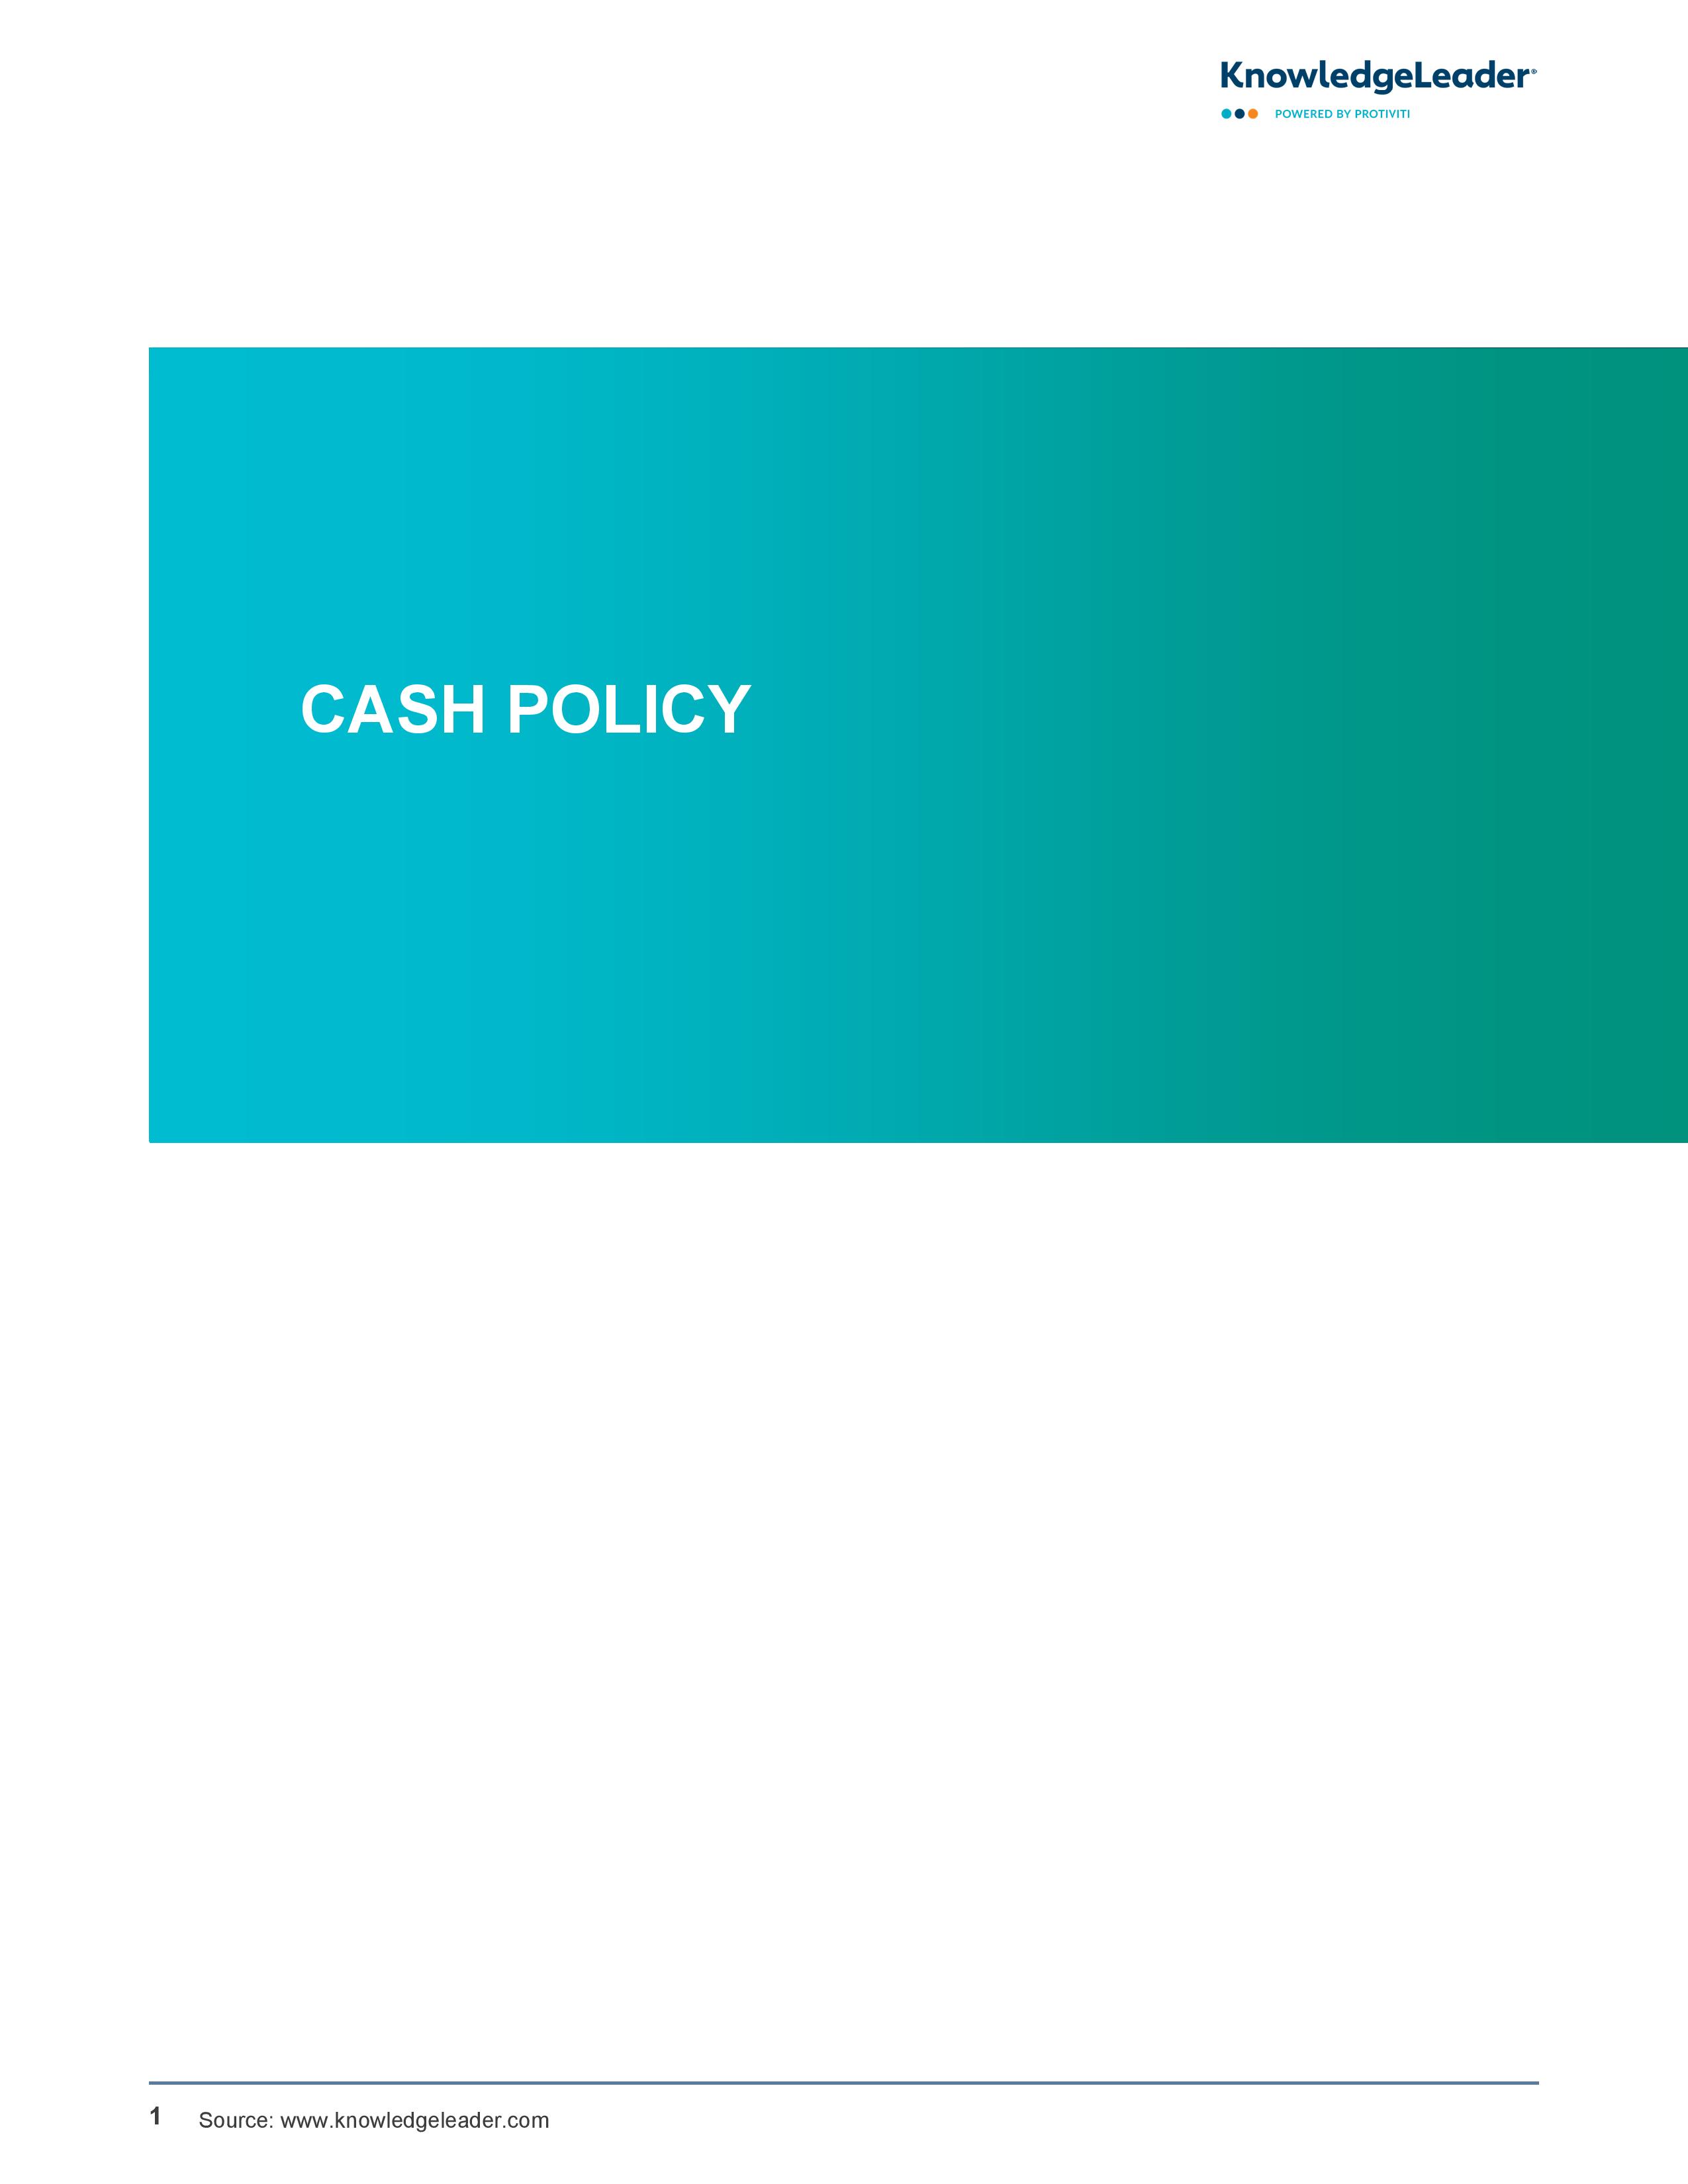 Screenshot of the first page of Cash Policy